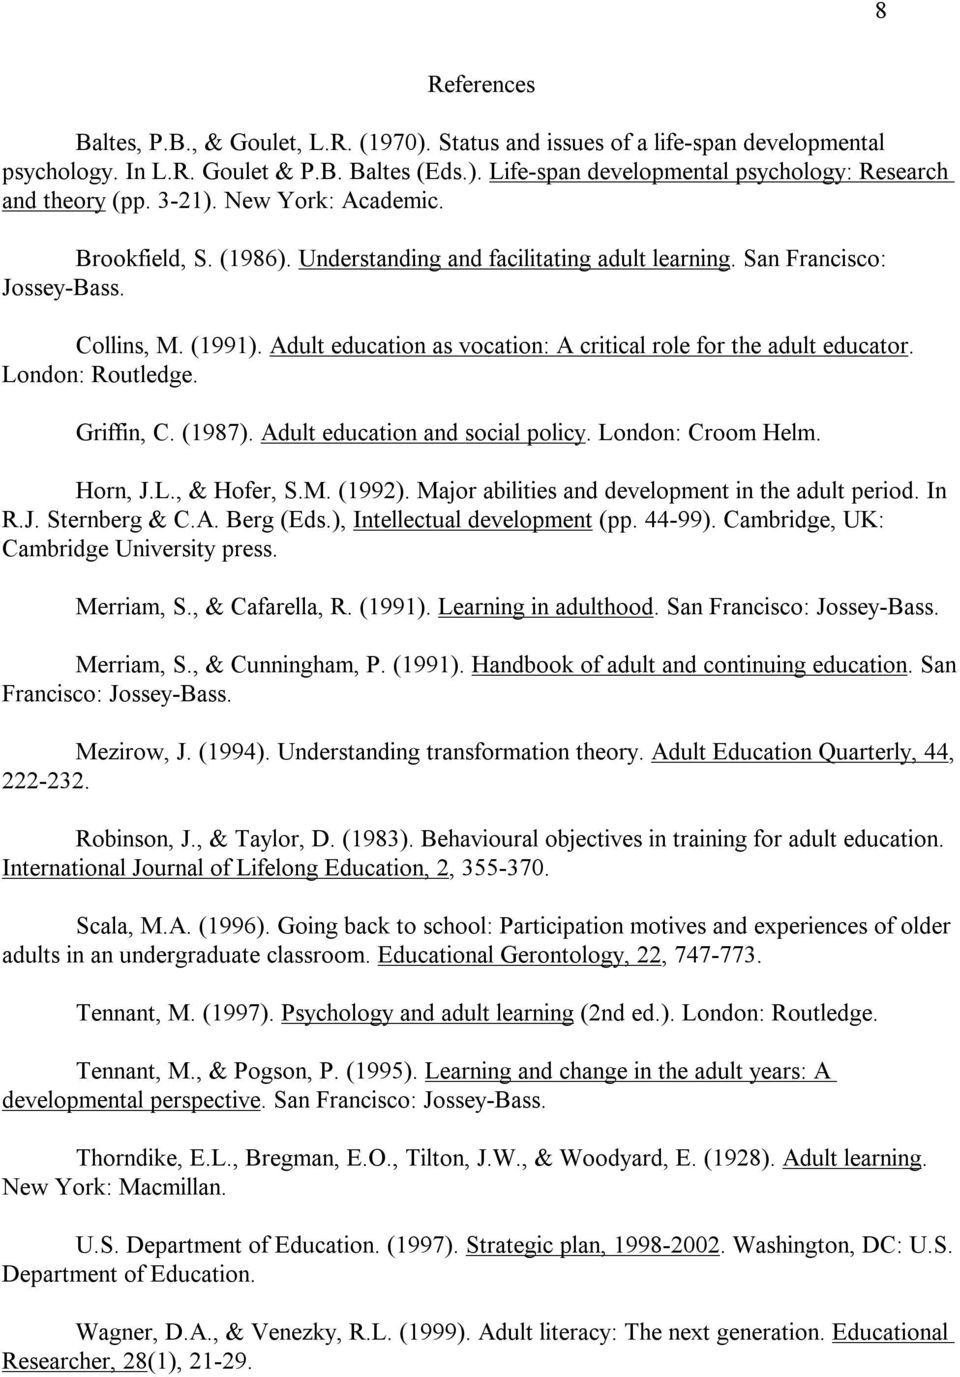 Adult education as vocation: A critical role for the adult educator. London: Routledge. Griffin, C. (1987). Adult education and social policy. London: Croom Helm. Horn, J.L., & Hofer, S.M. (1992).